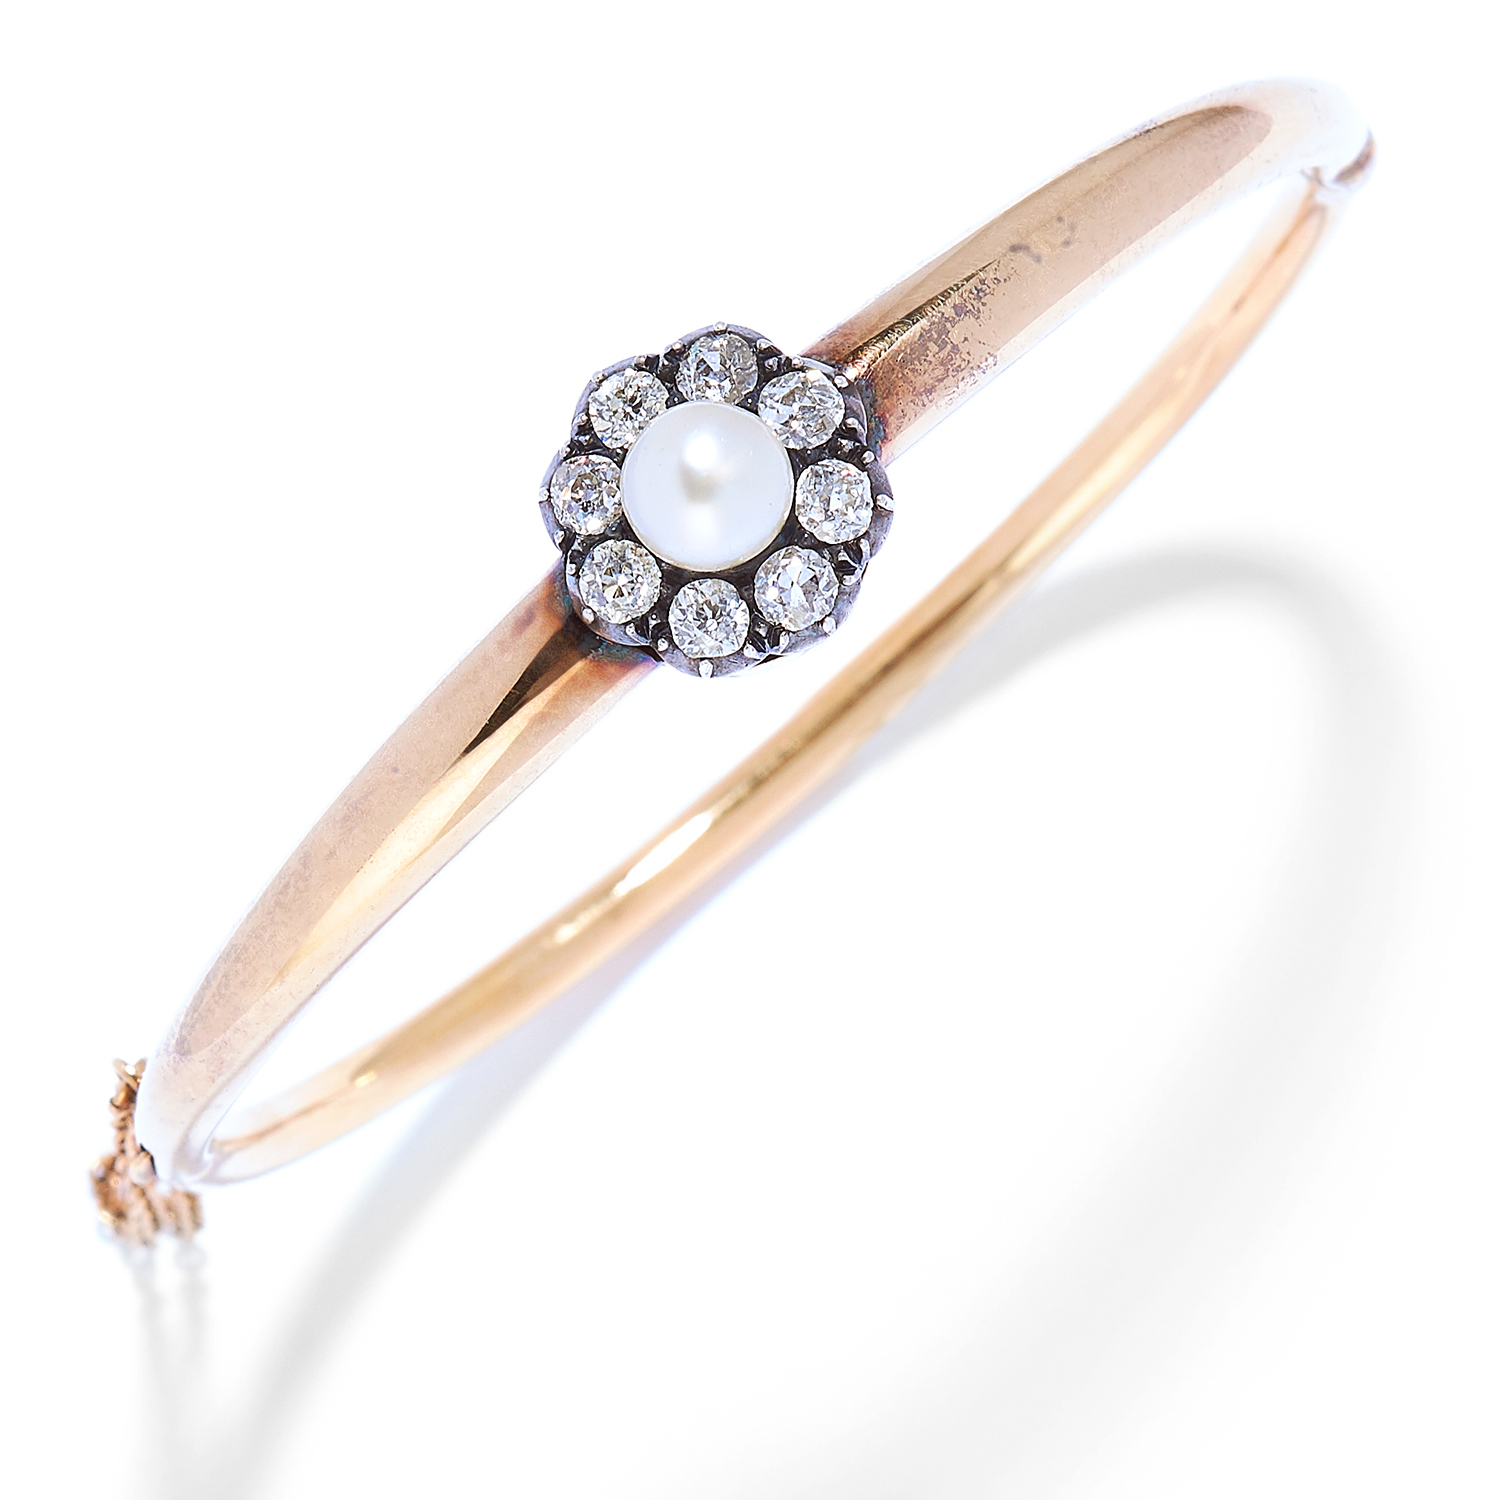 ANTIQUE DIAMOND AND PEARL BANGLE in yellow gold, set with a pearl approximately 6.4mm in diameter in